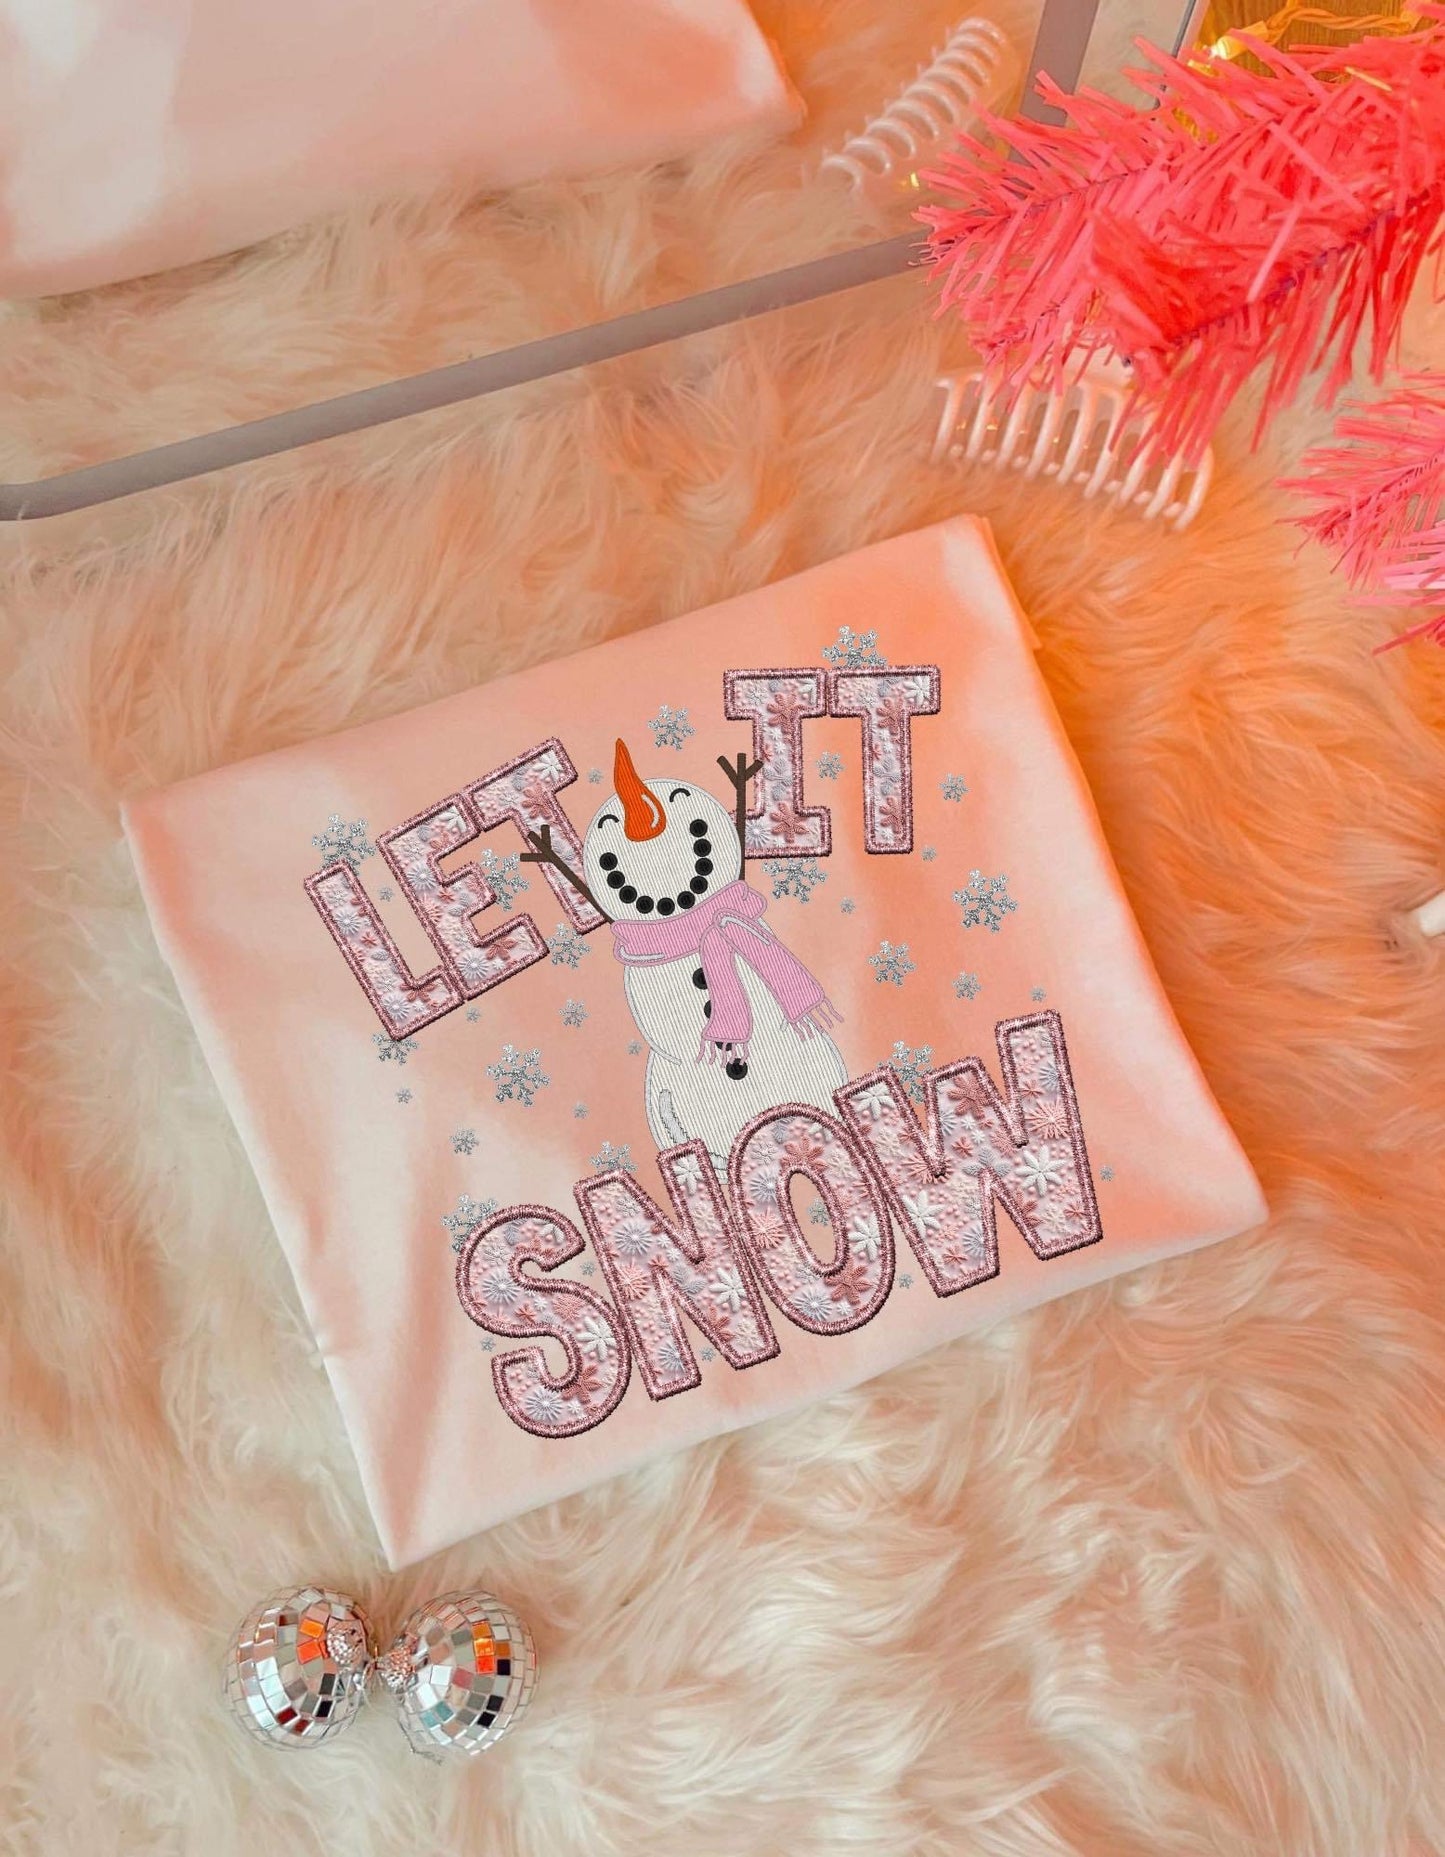 LET IT SNOW "FAUX EMBROIDERY"